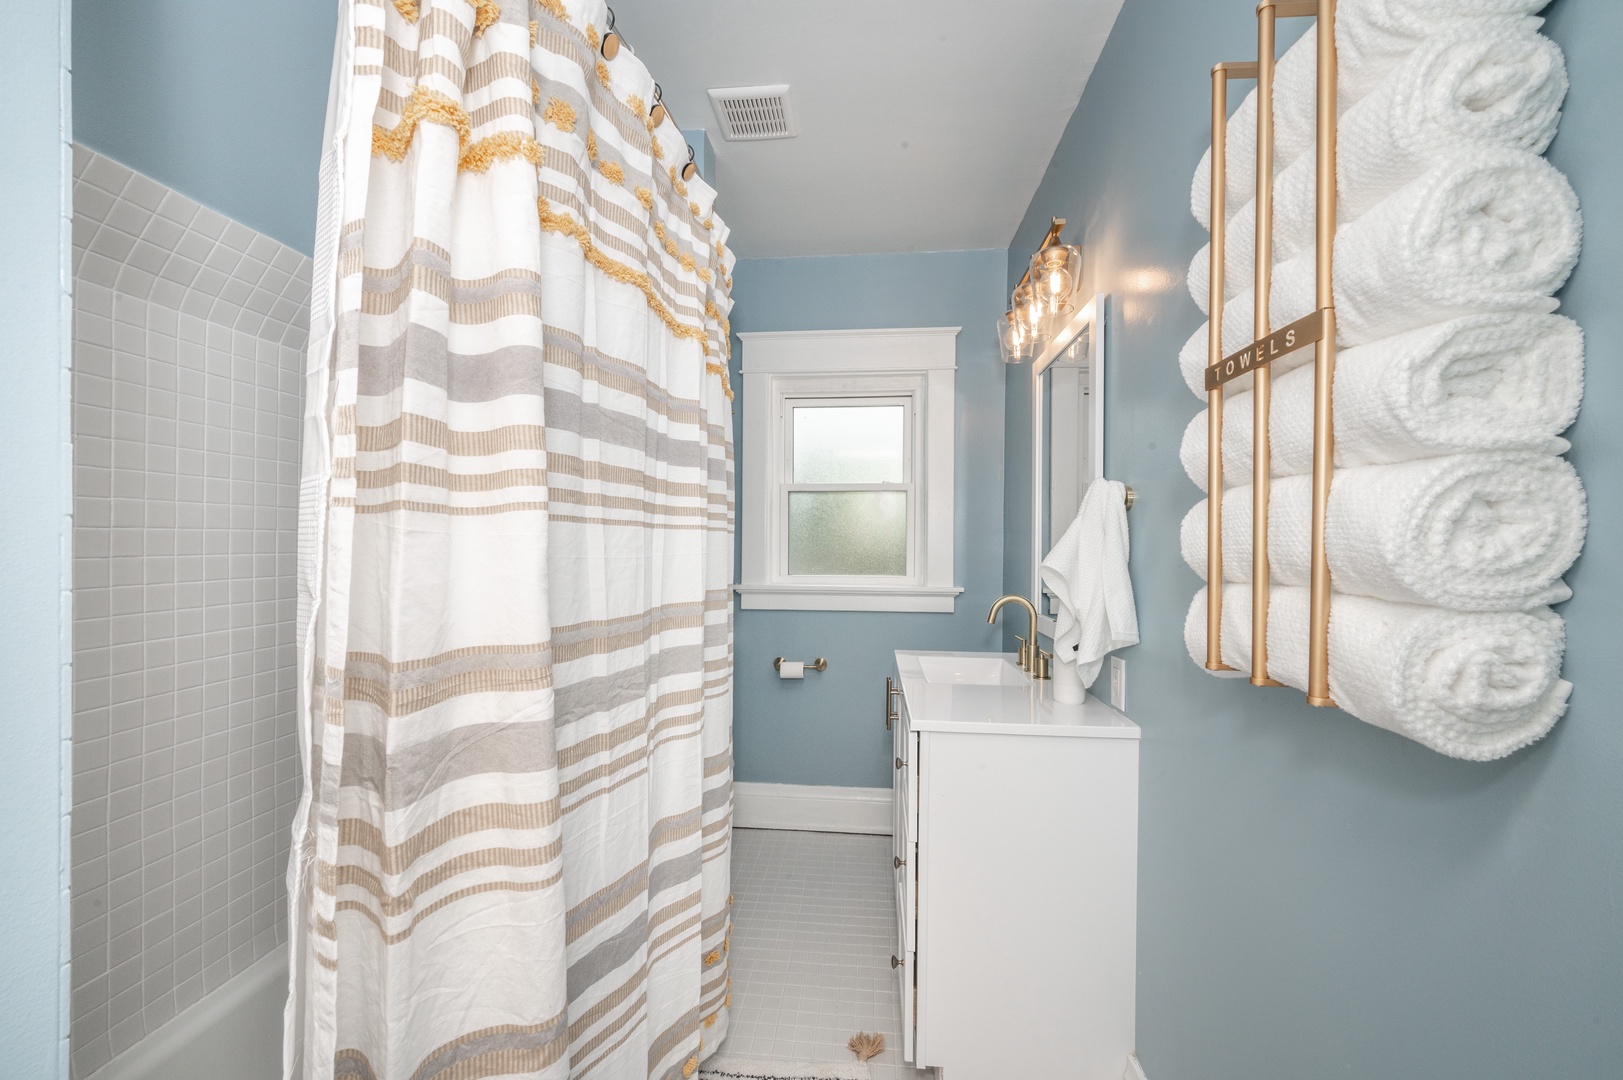 The 2nd floor full bathroom offers a single vanity & shower/tub combo